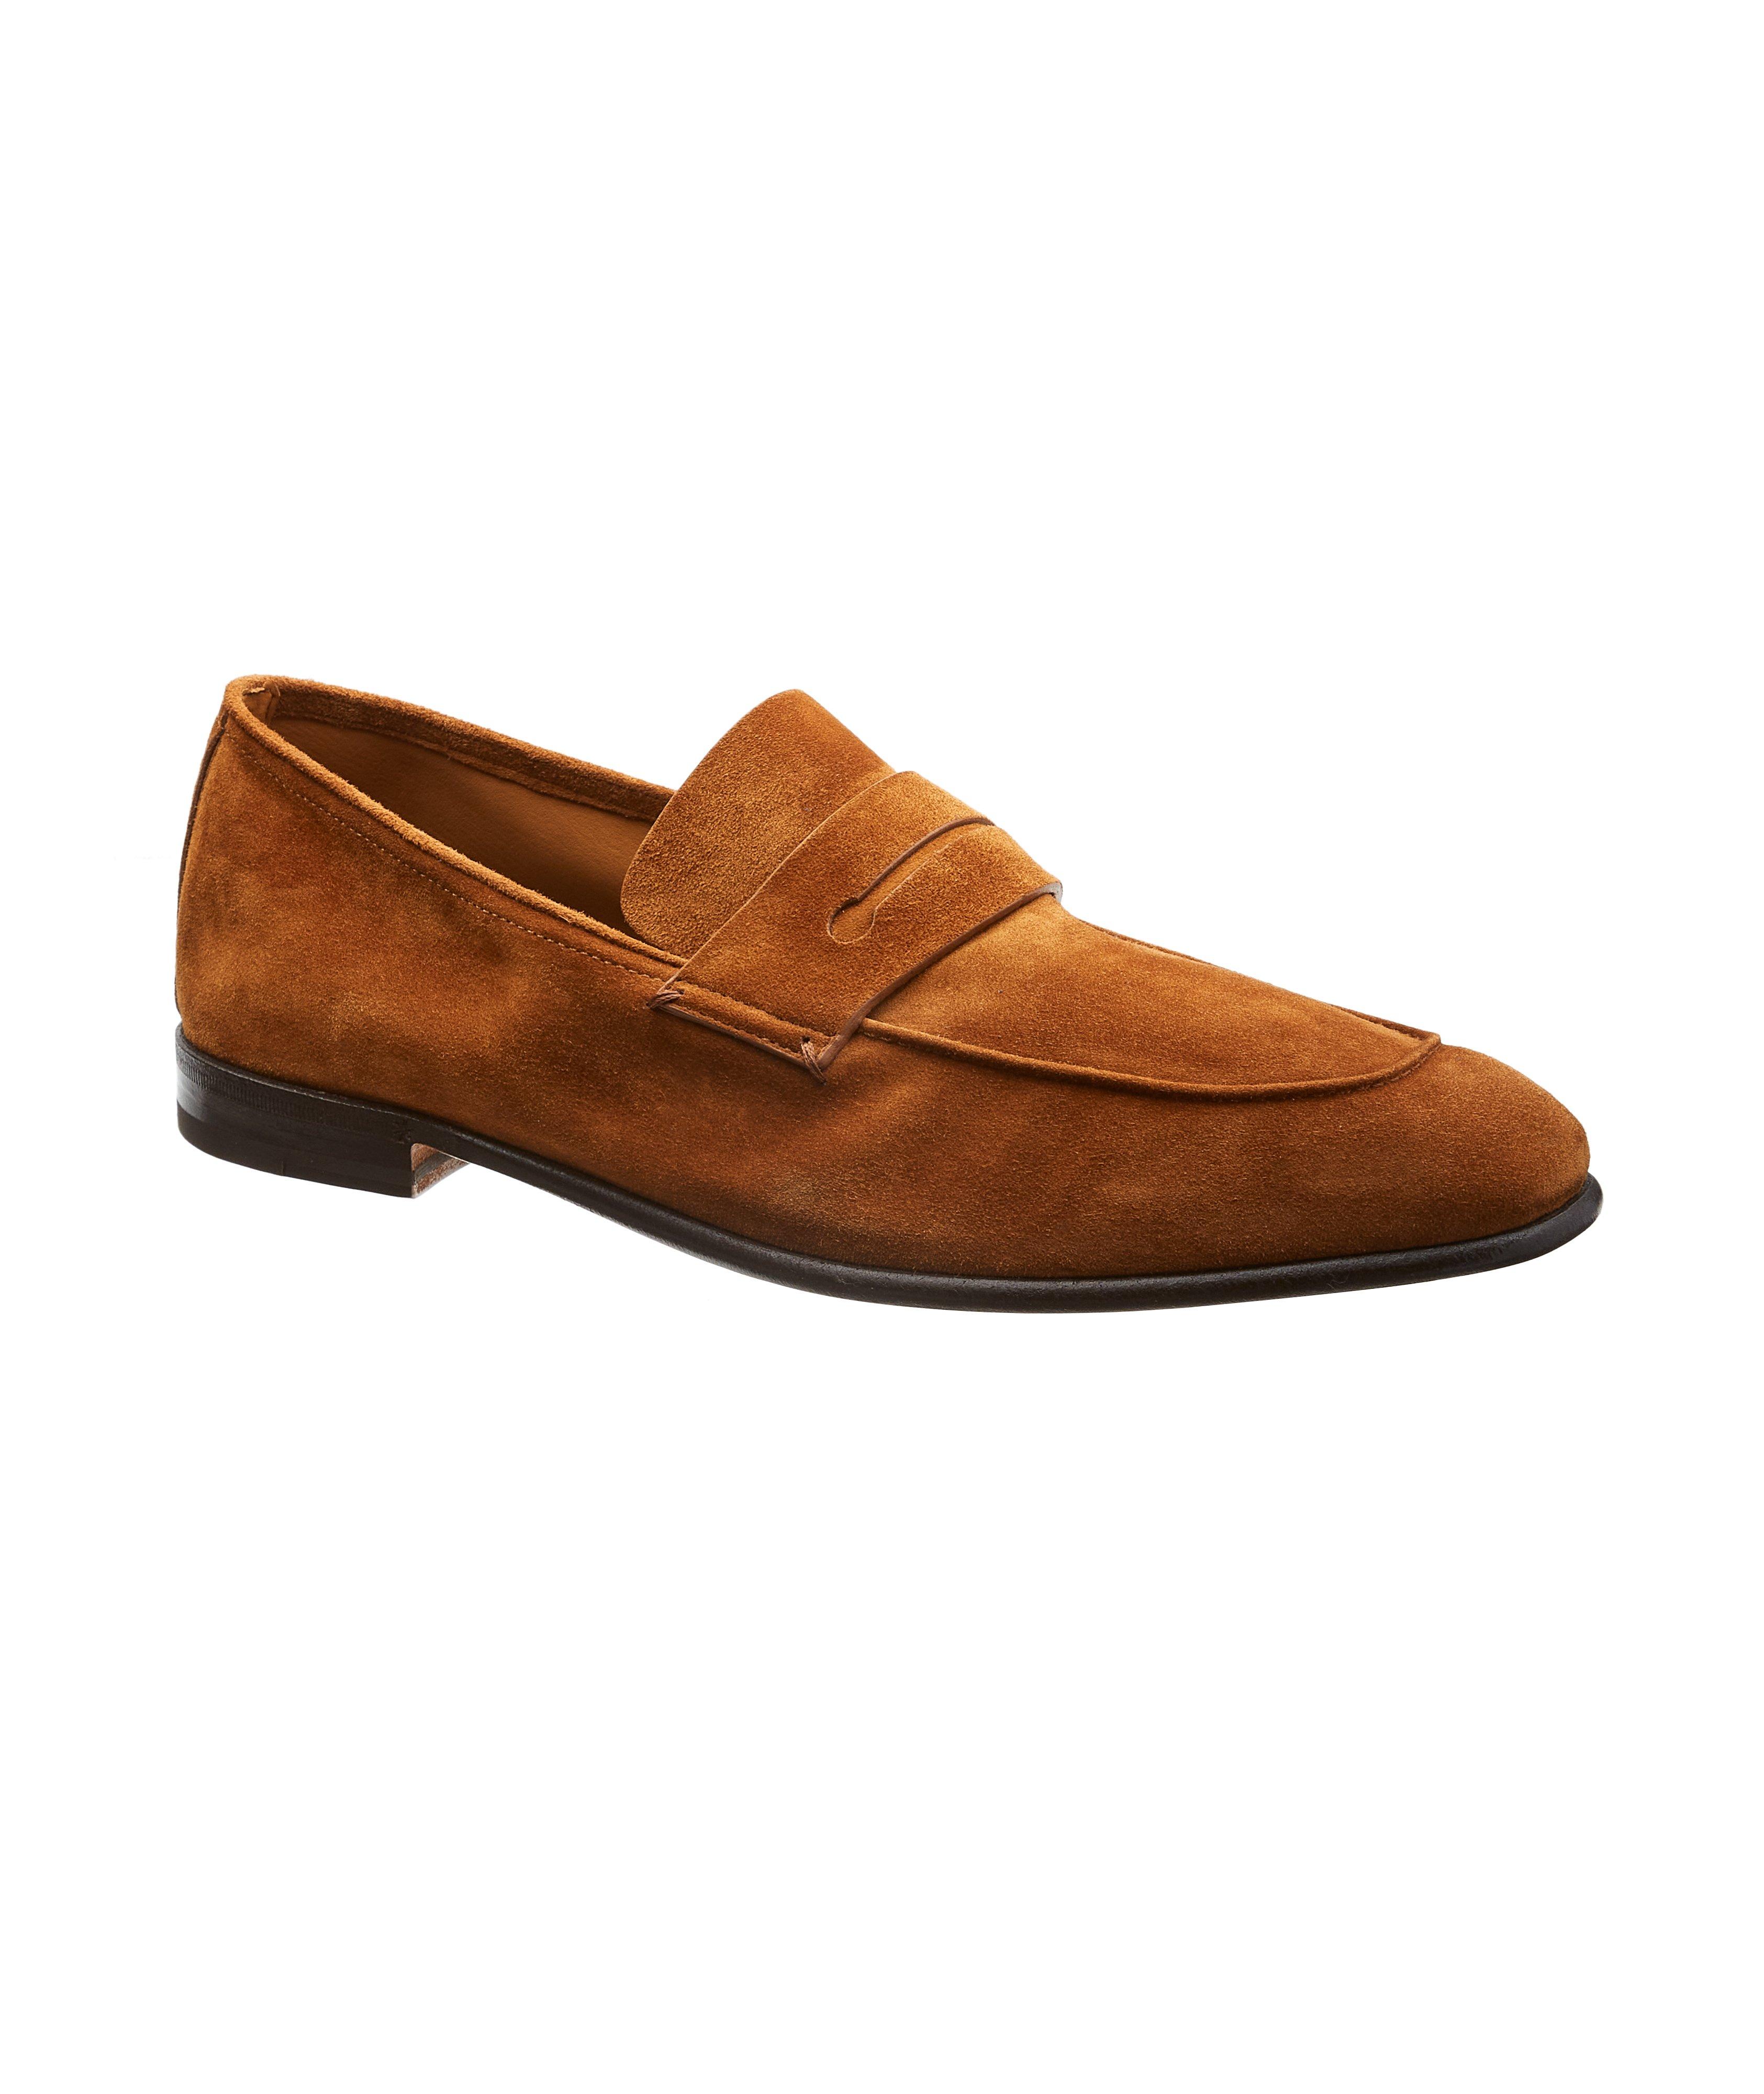 Zegna L'Asola Suede Loafers | Dress Shoes | Harry Rosen